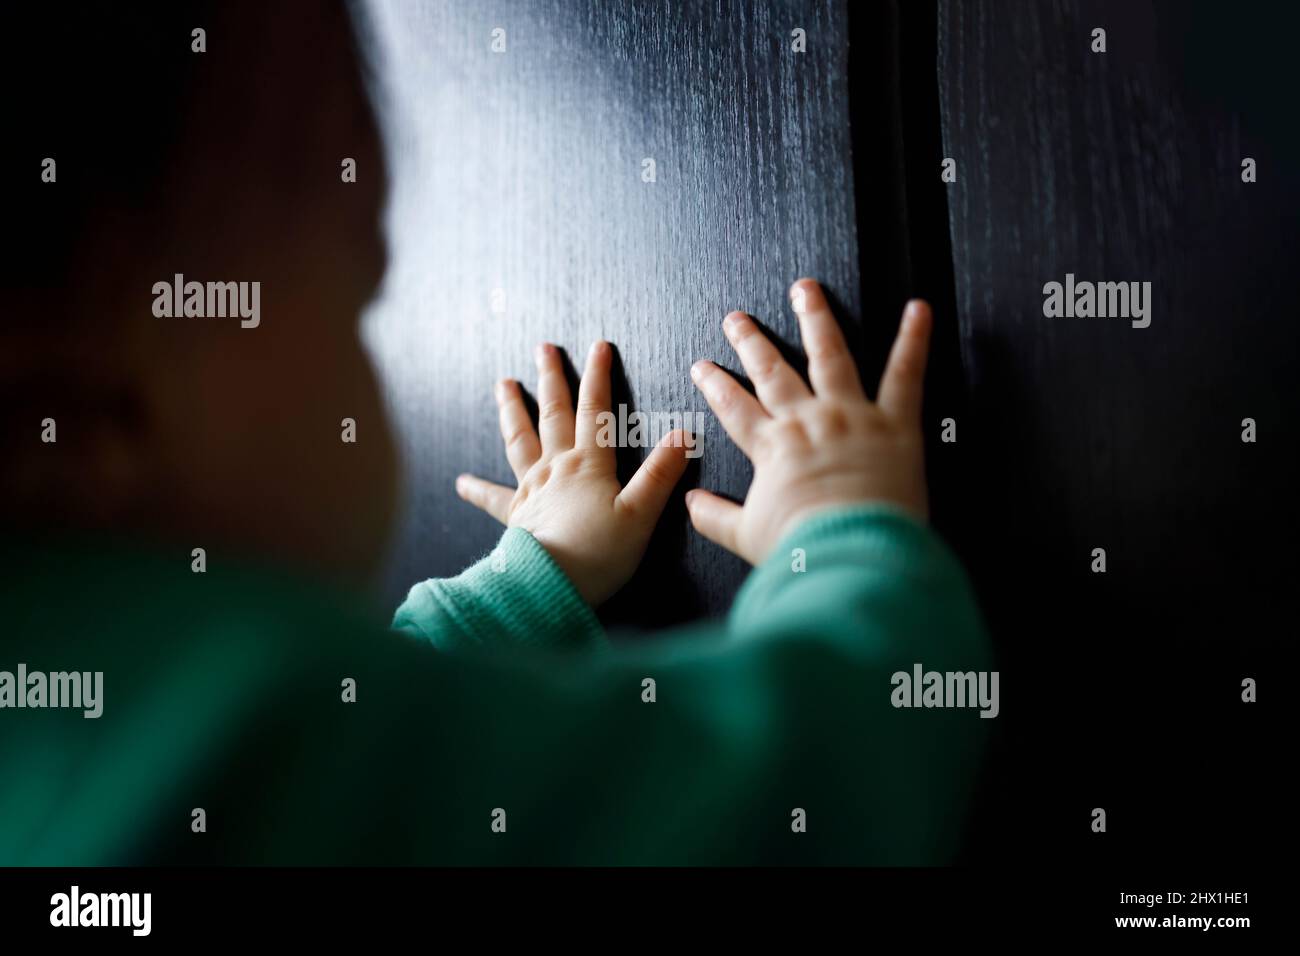 Babies hand on a black surface, humanitarian aid concept Stock Photo